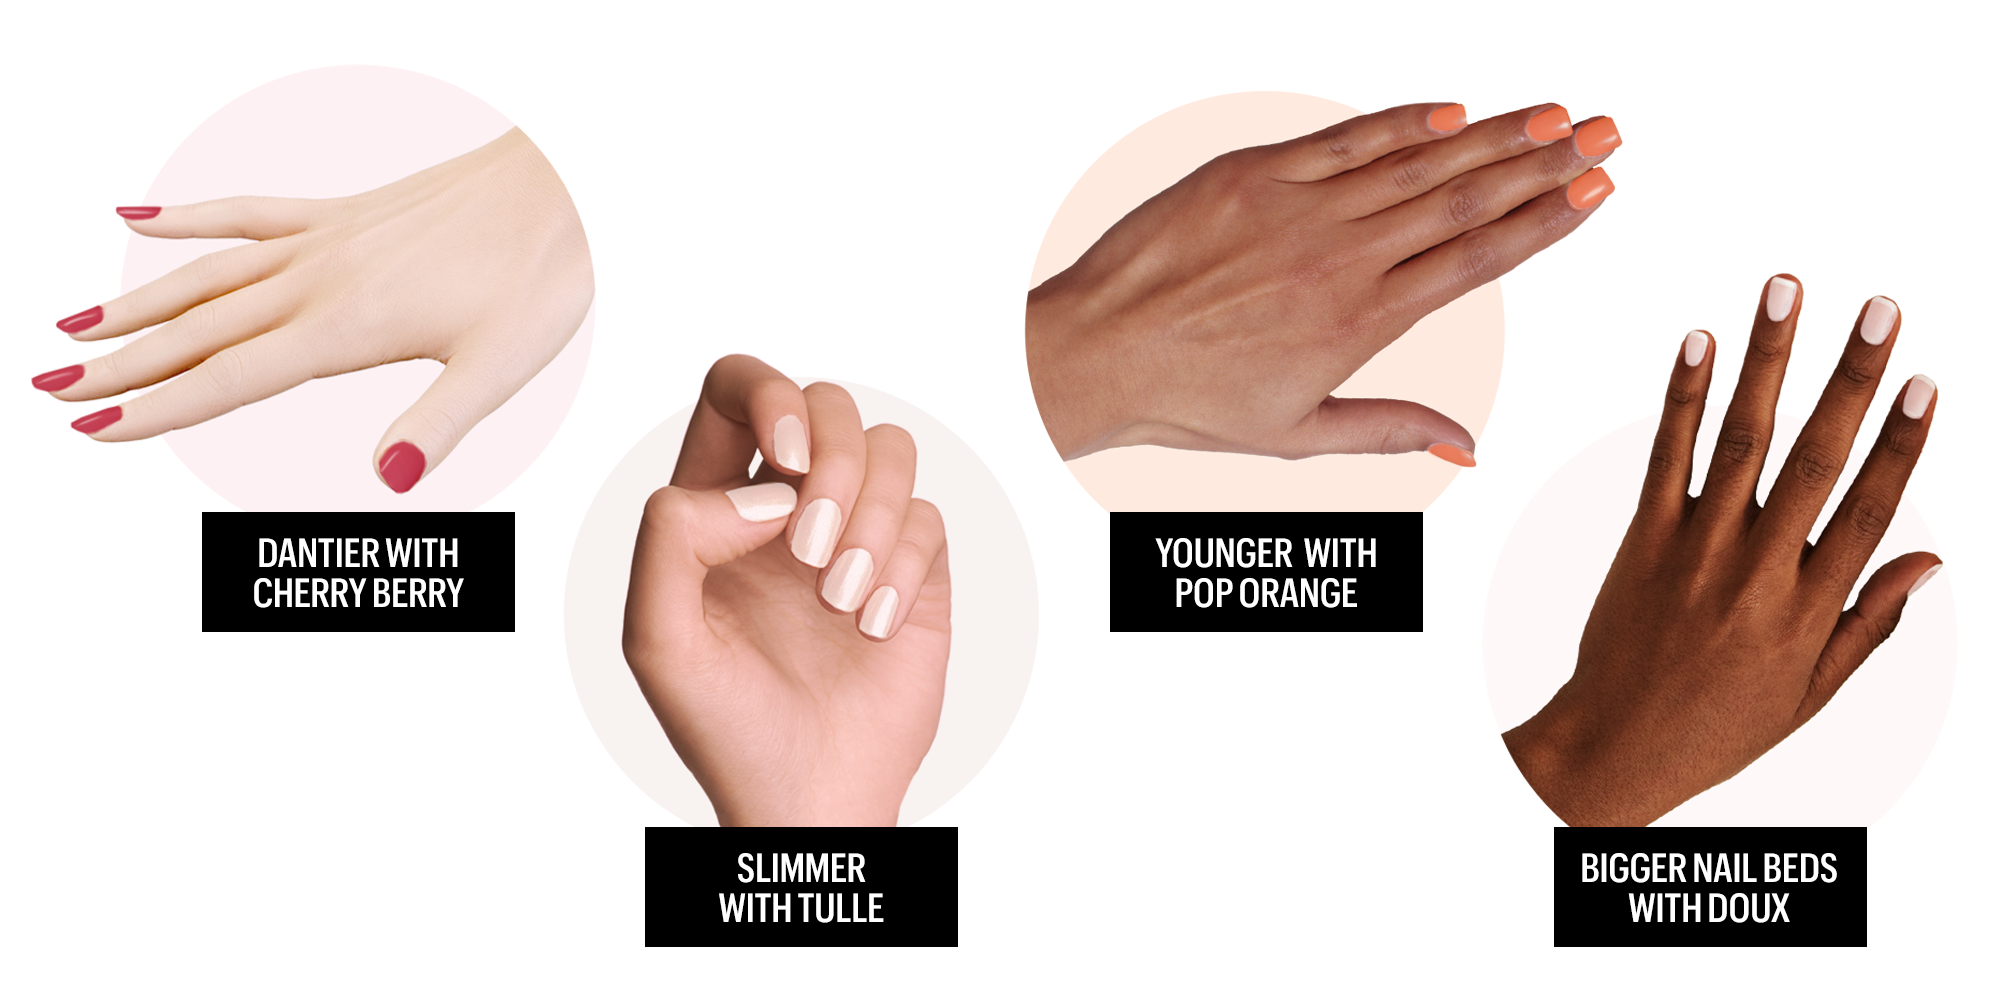 10. "How to Choose the Right Nail Color for Your White Skin Tone" - wide 3